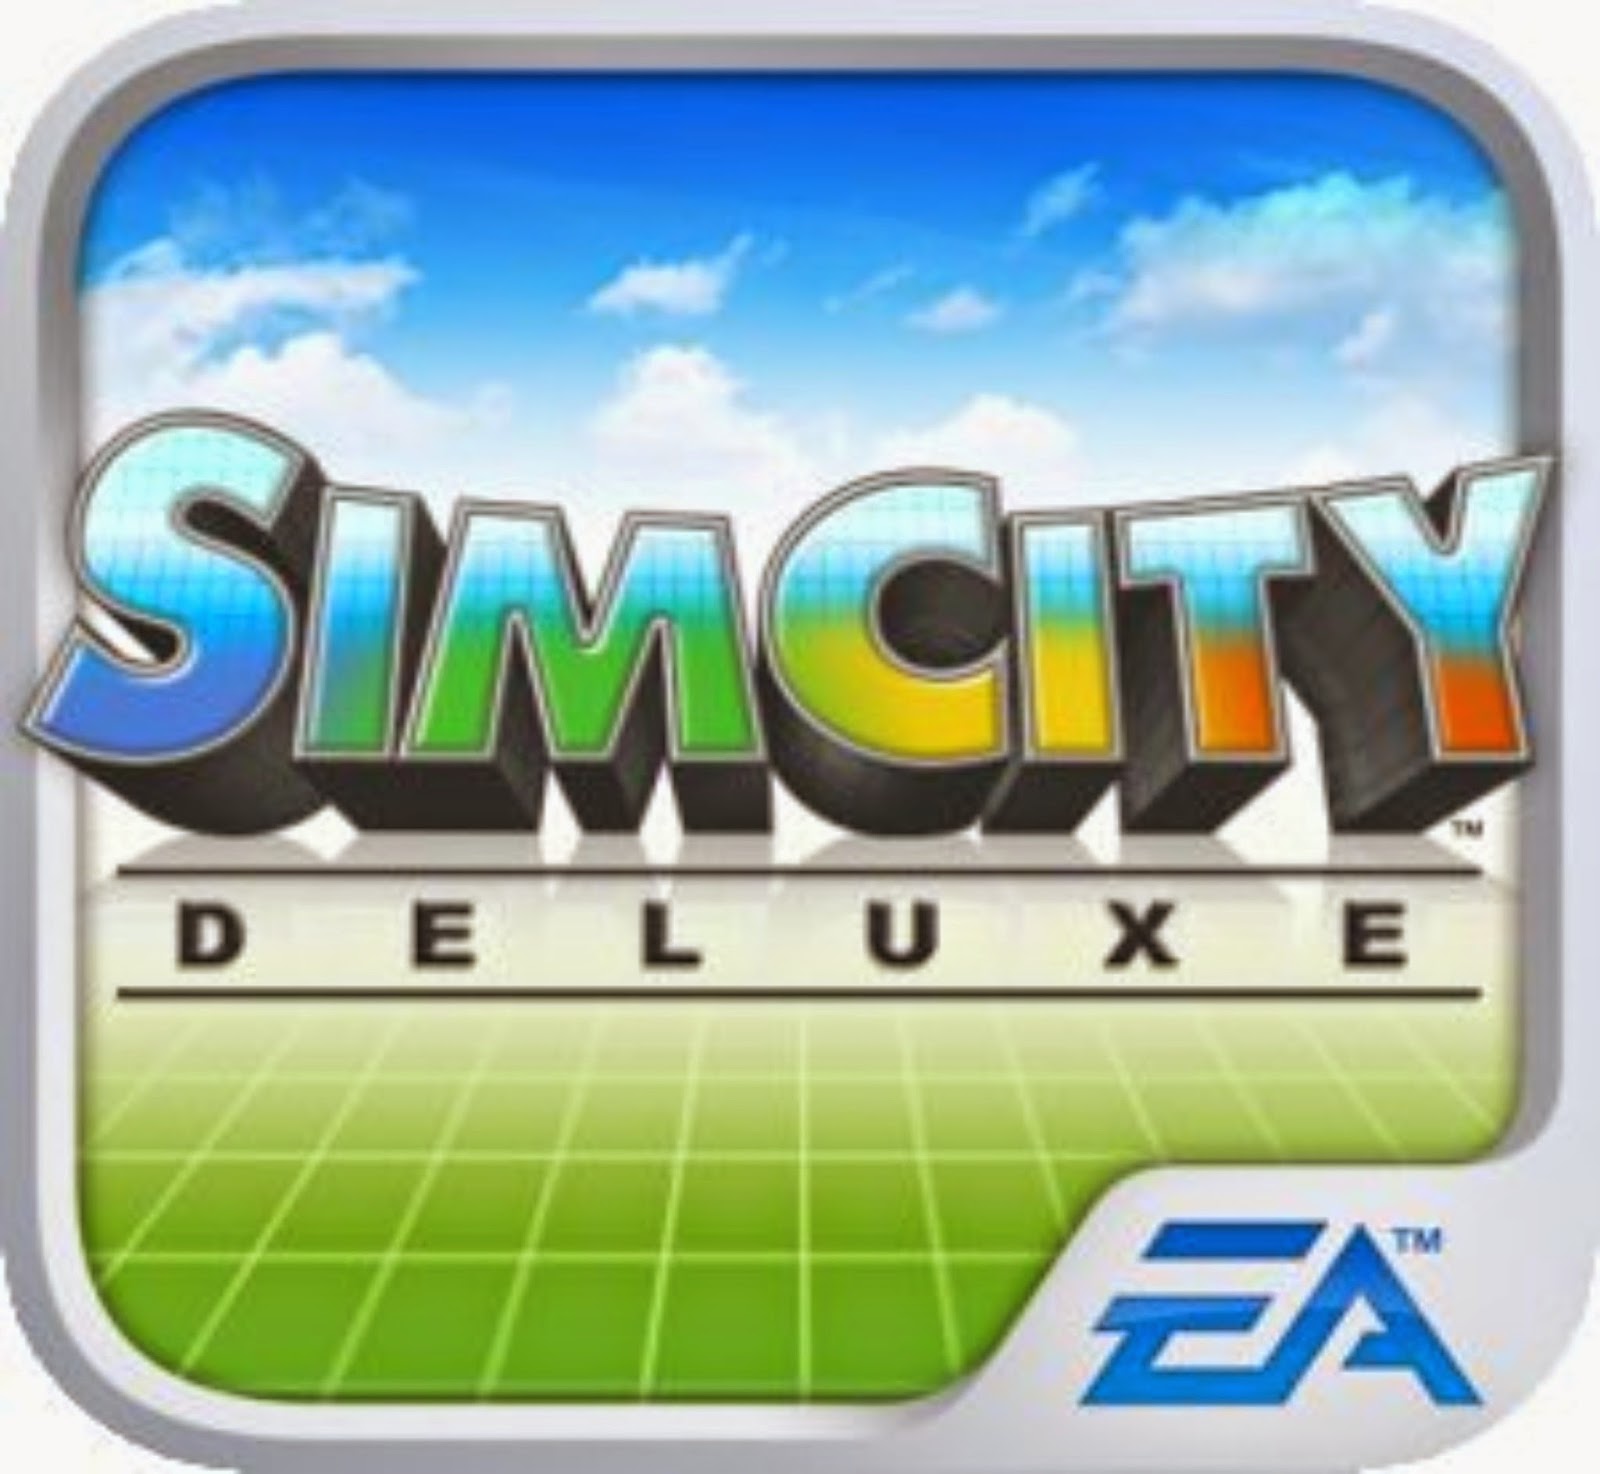 SimCity Deluxe Apk Data Android